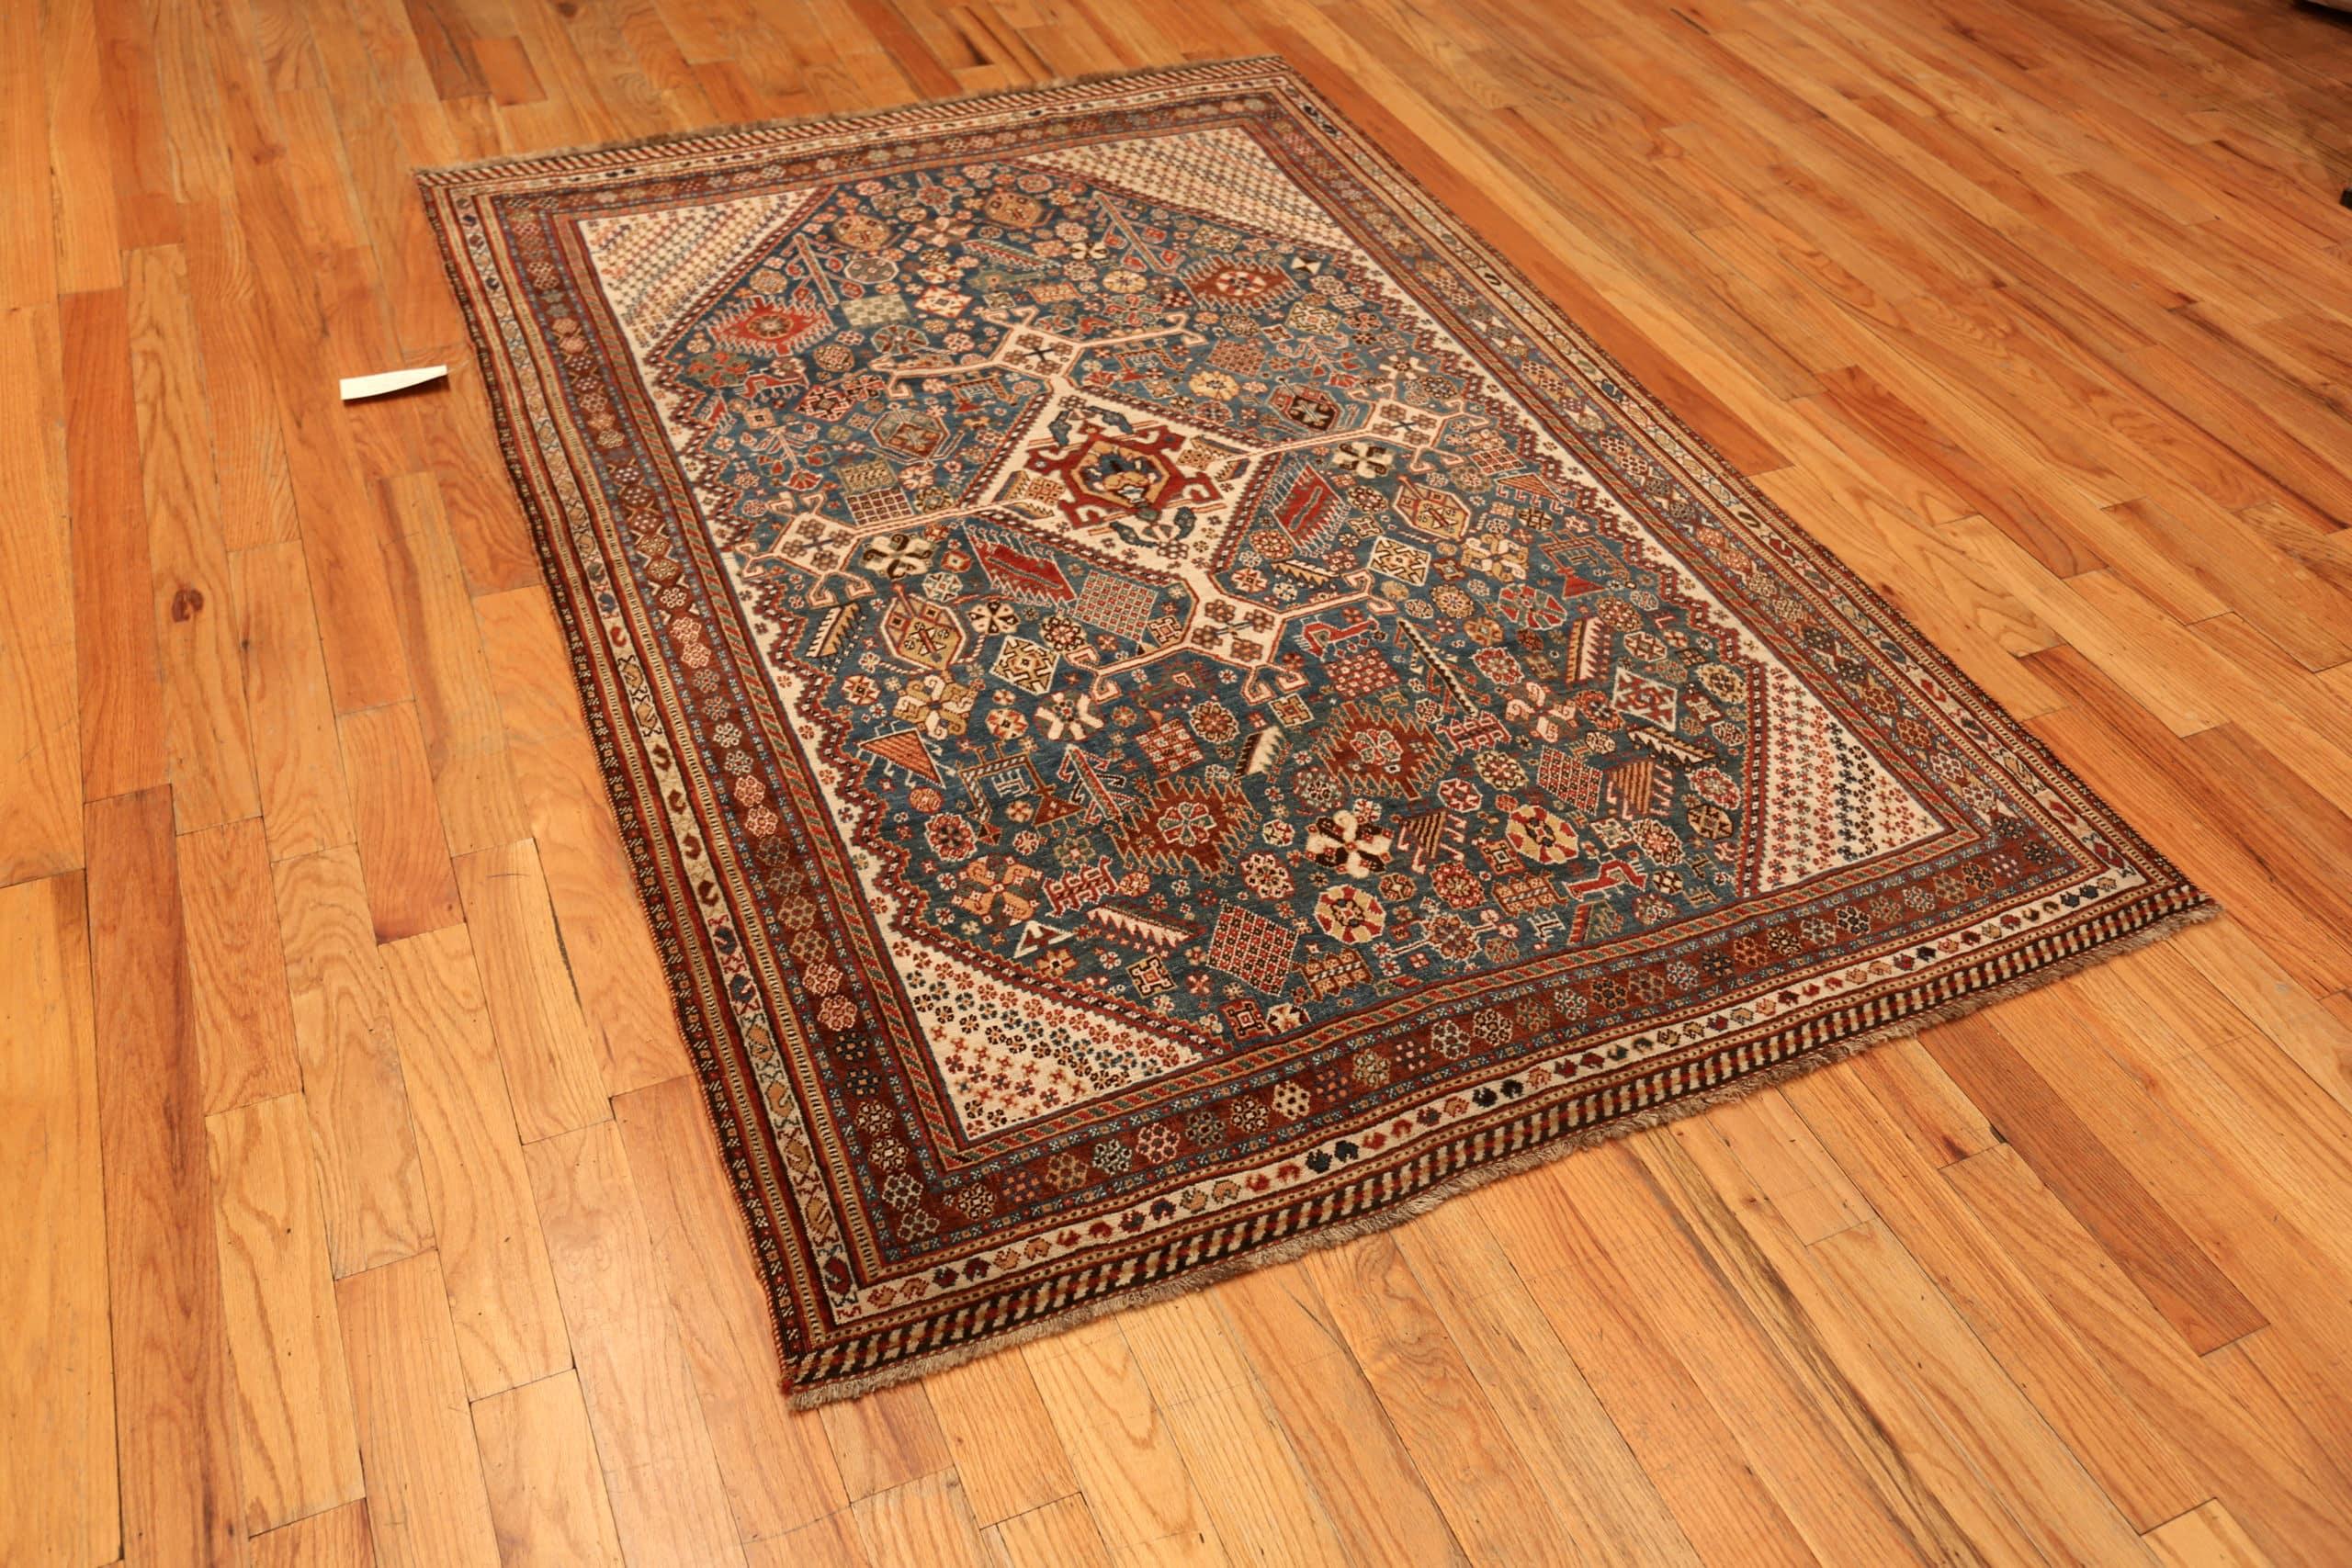 20th Century Nazmiyal Collection Antique Persian Qashqai Rug. Size: 4 ft 10 in x 7 ft 2 in